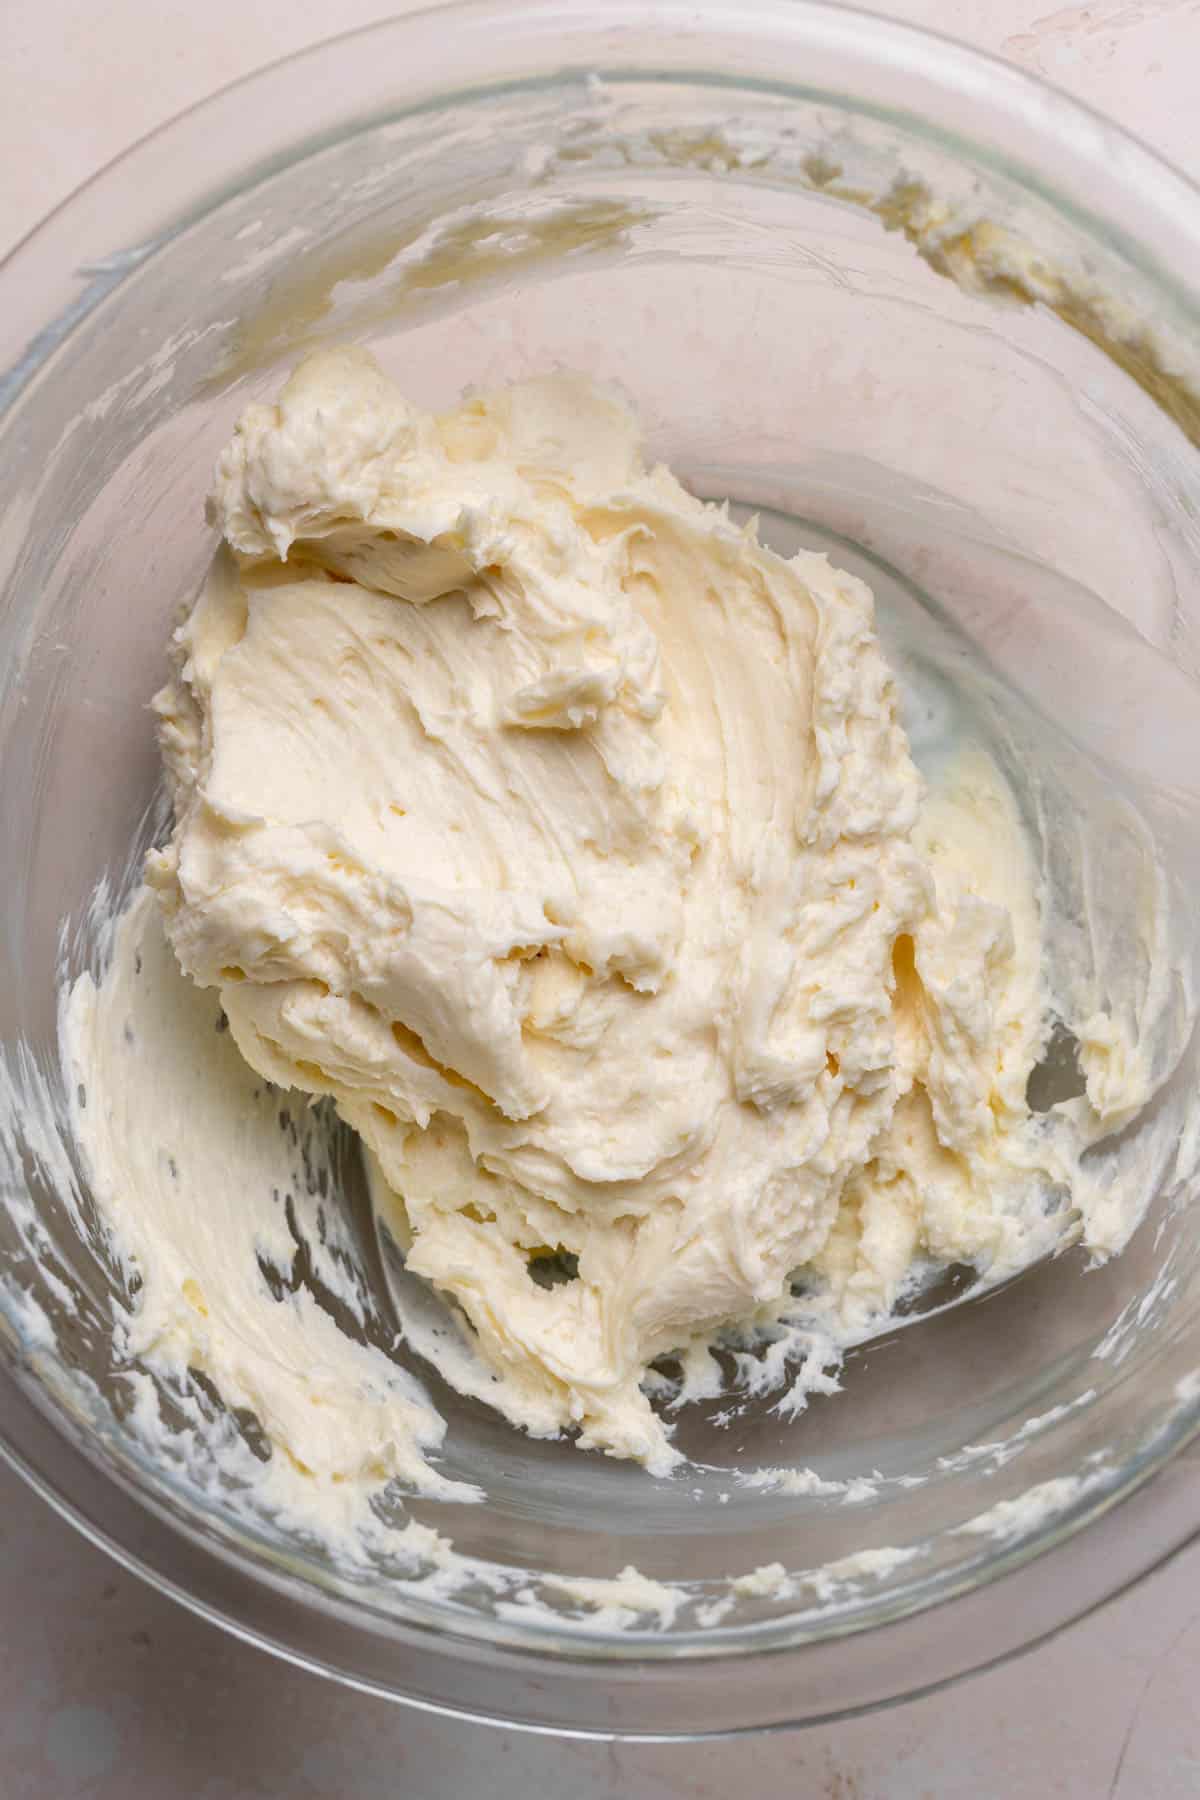 Cream cheese filling in a glass bowl.